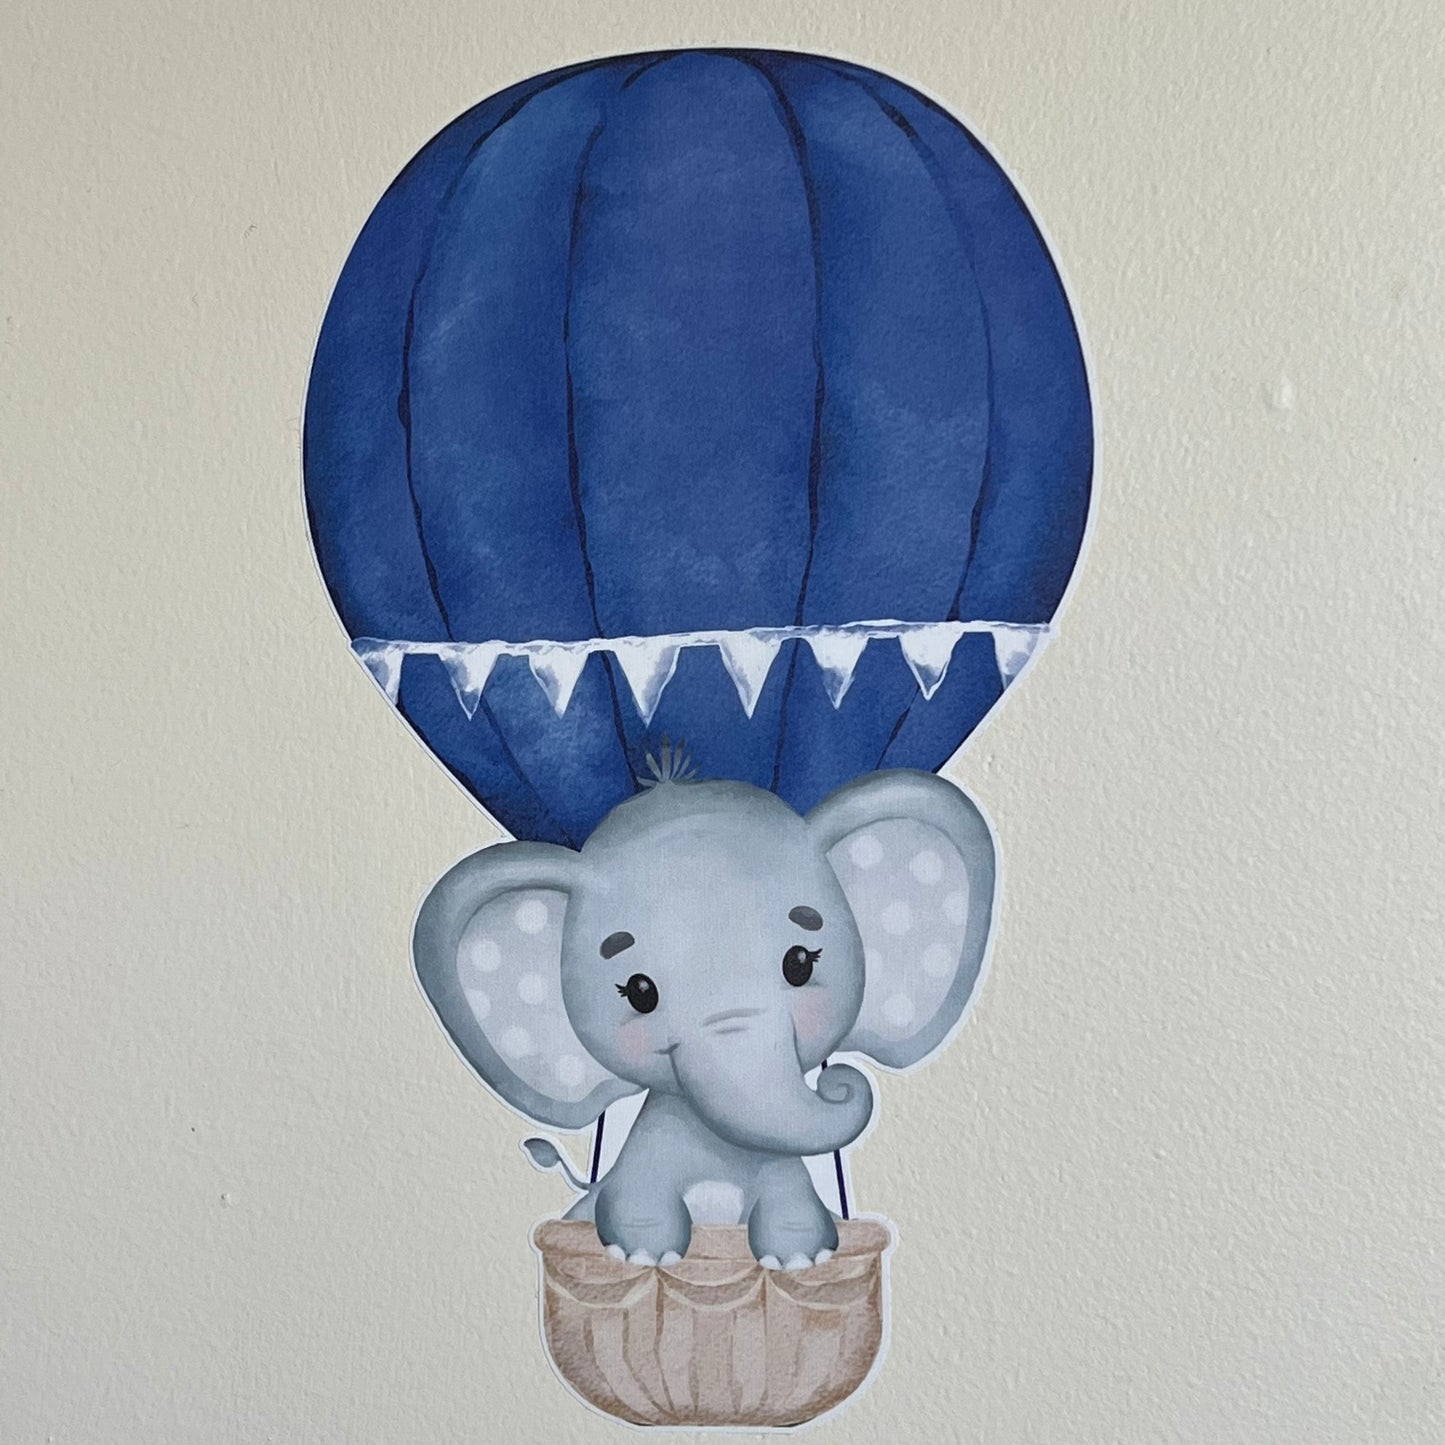 Baby Elephants In Hot Air Balloon Fabric Wall Decals